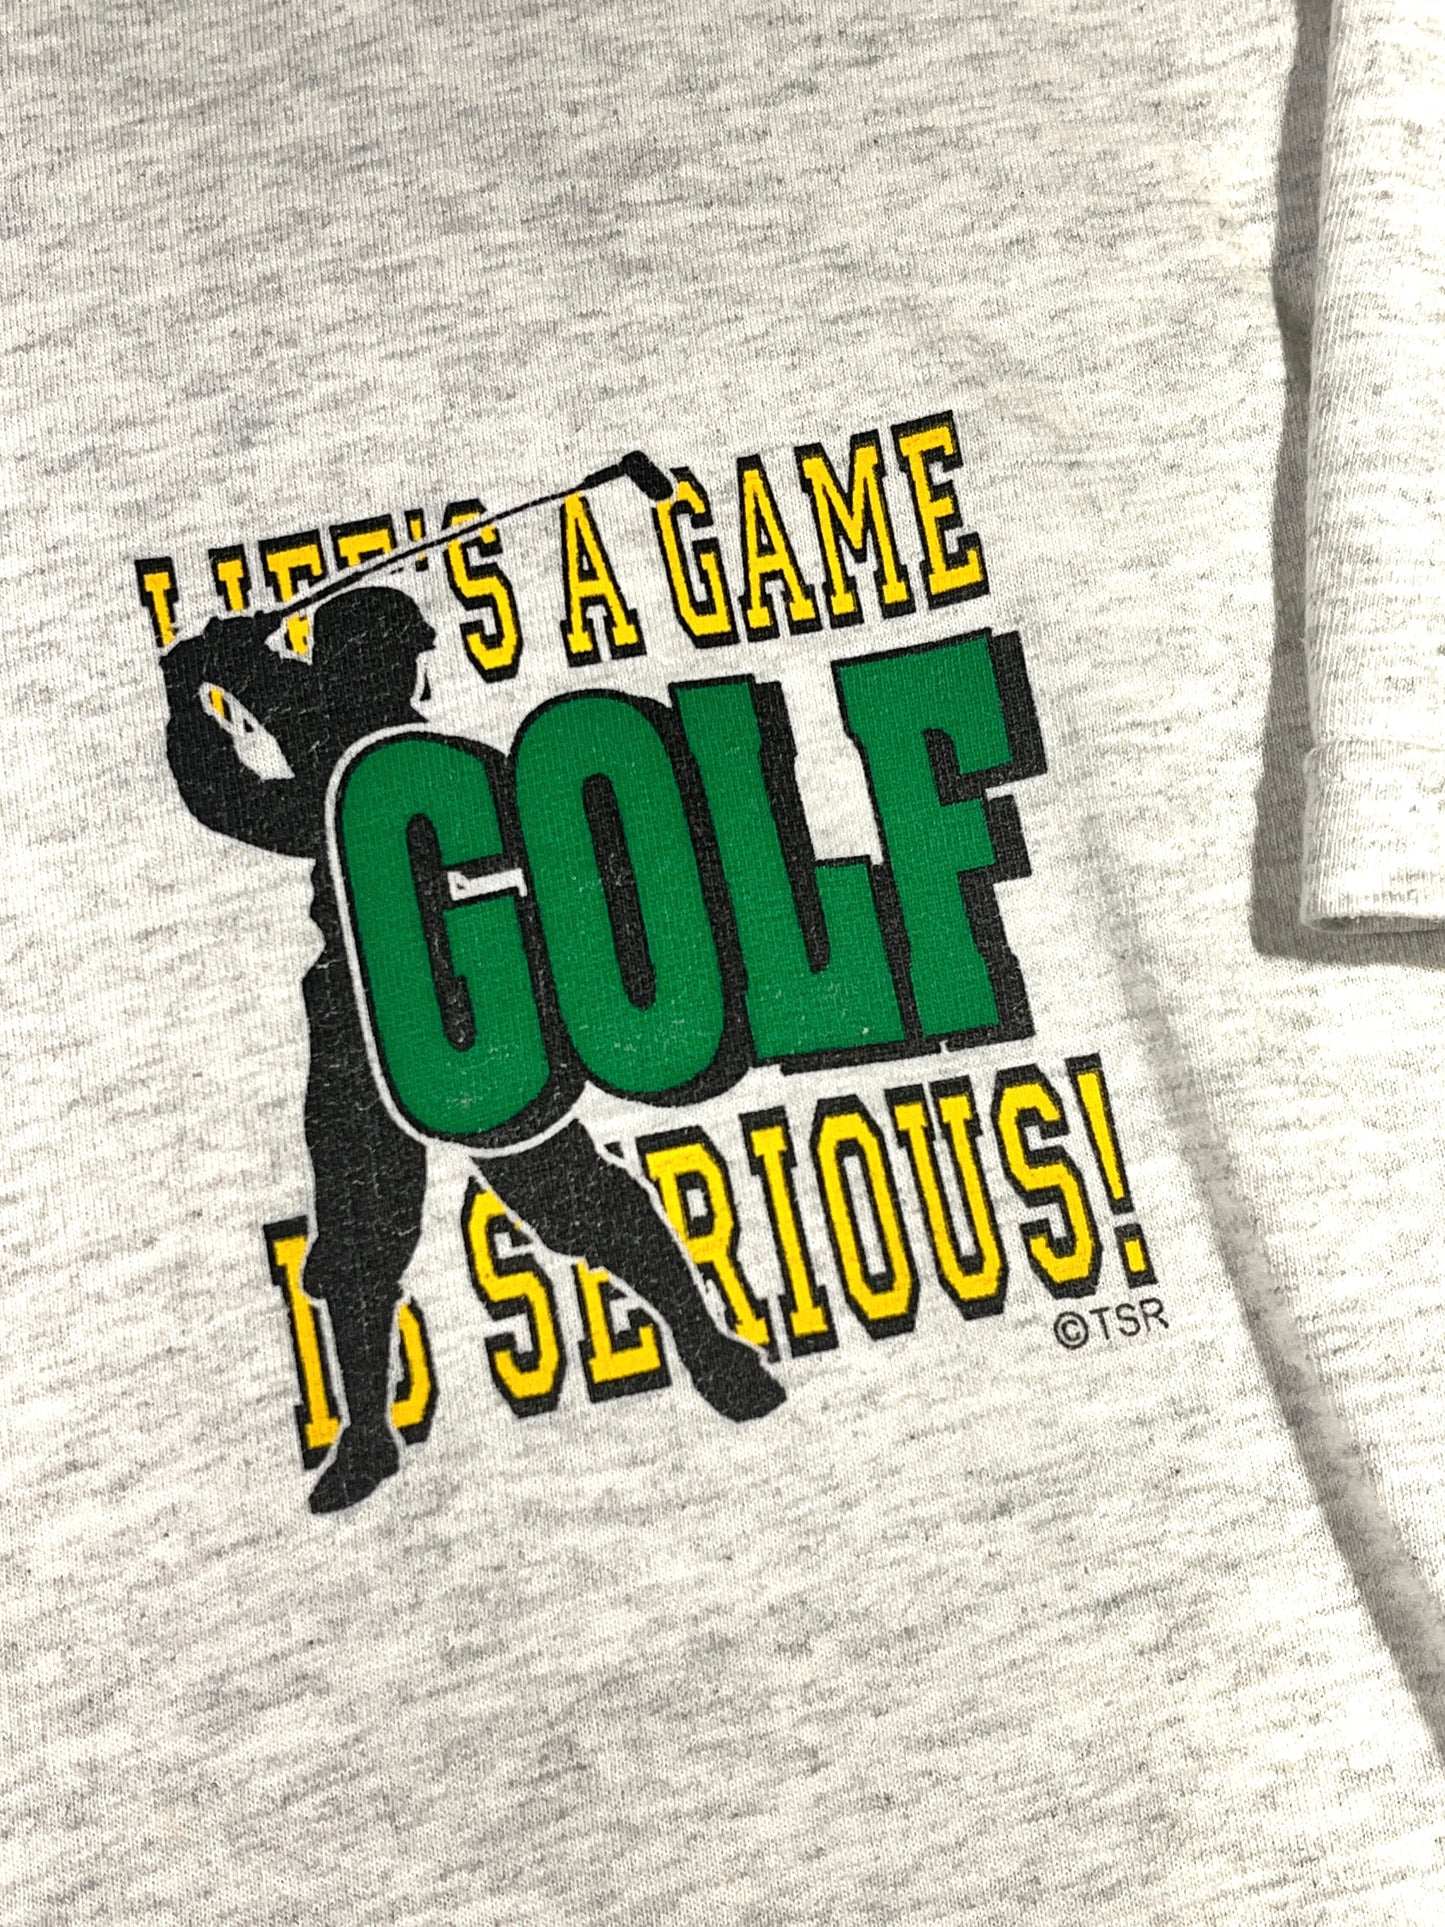 Vintage Golf T-Shirt Lifes A Game Golf Is Serious